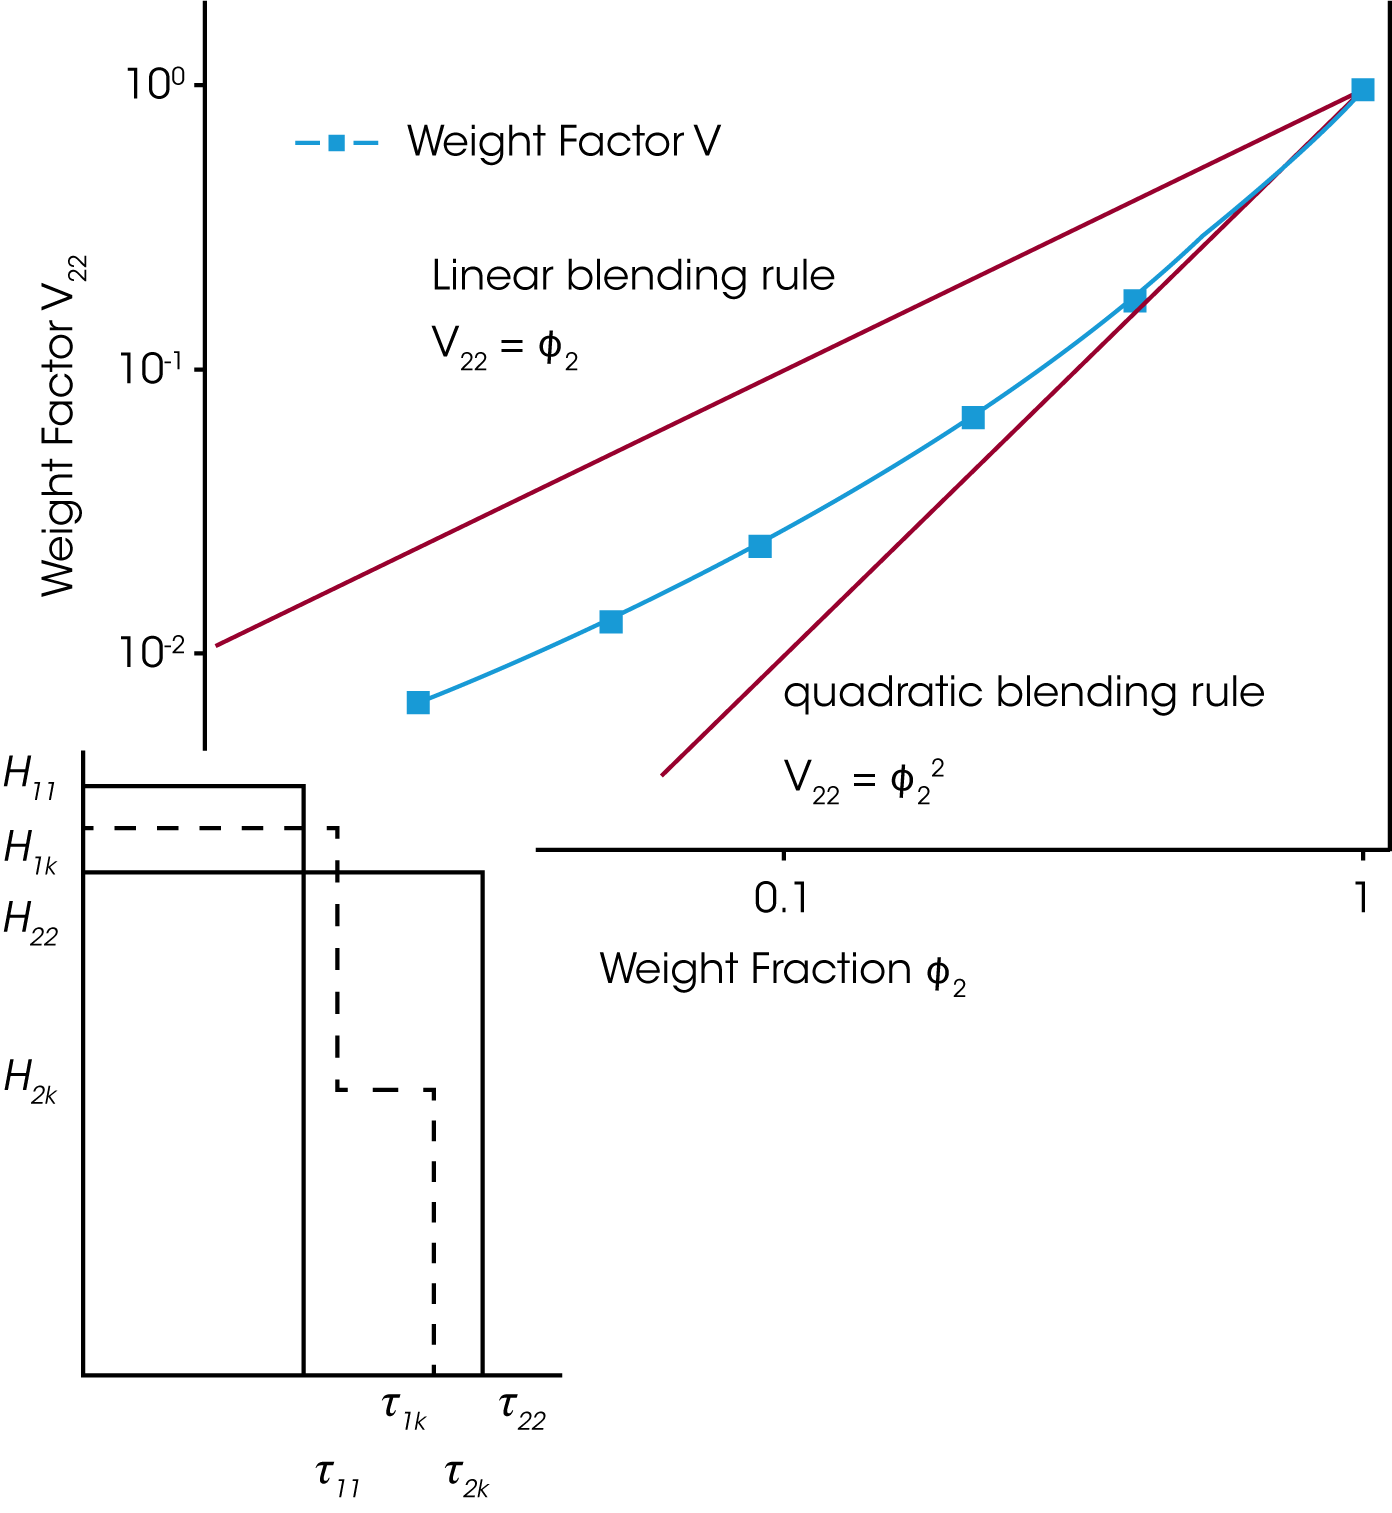 Figure 5. Weight factor for the contrigution of the high molecular weight component as a function of the weight fraction. (V22=(H1k-H2k)/H11)